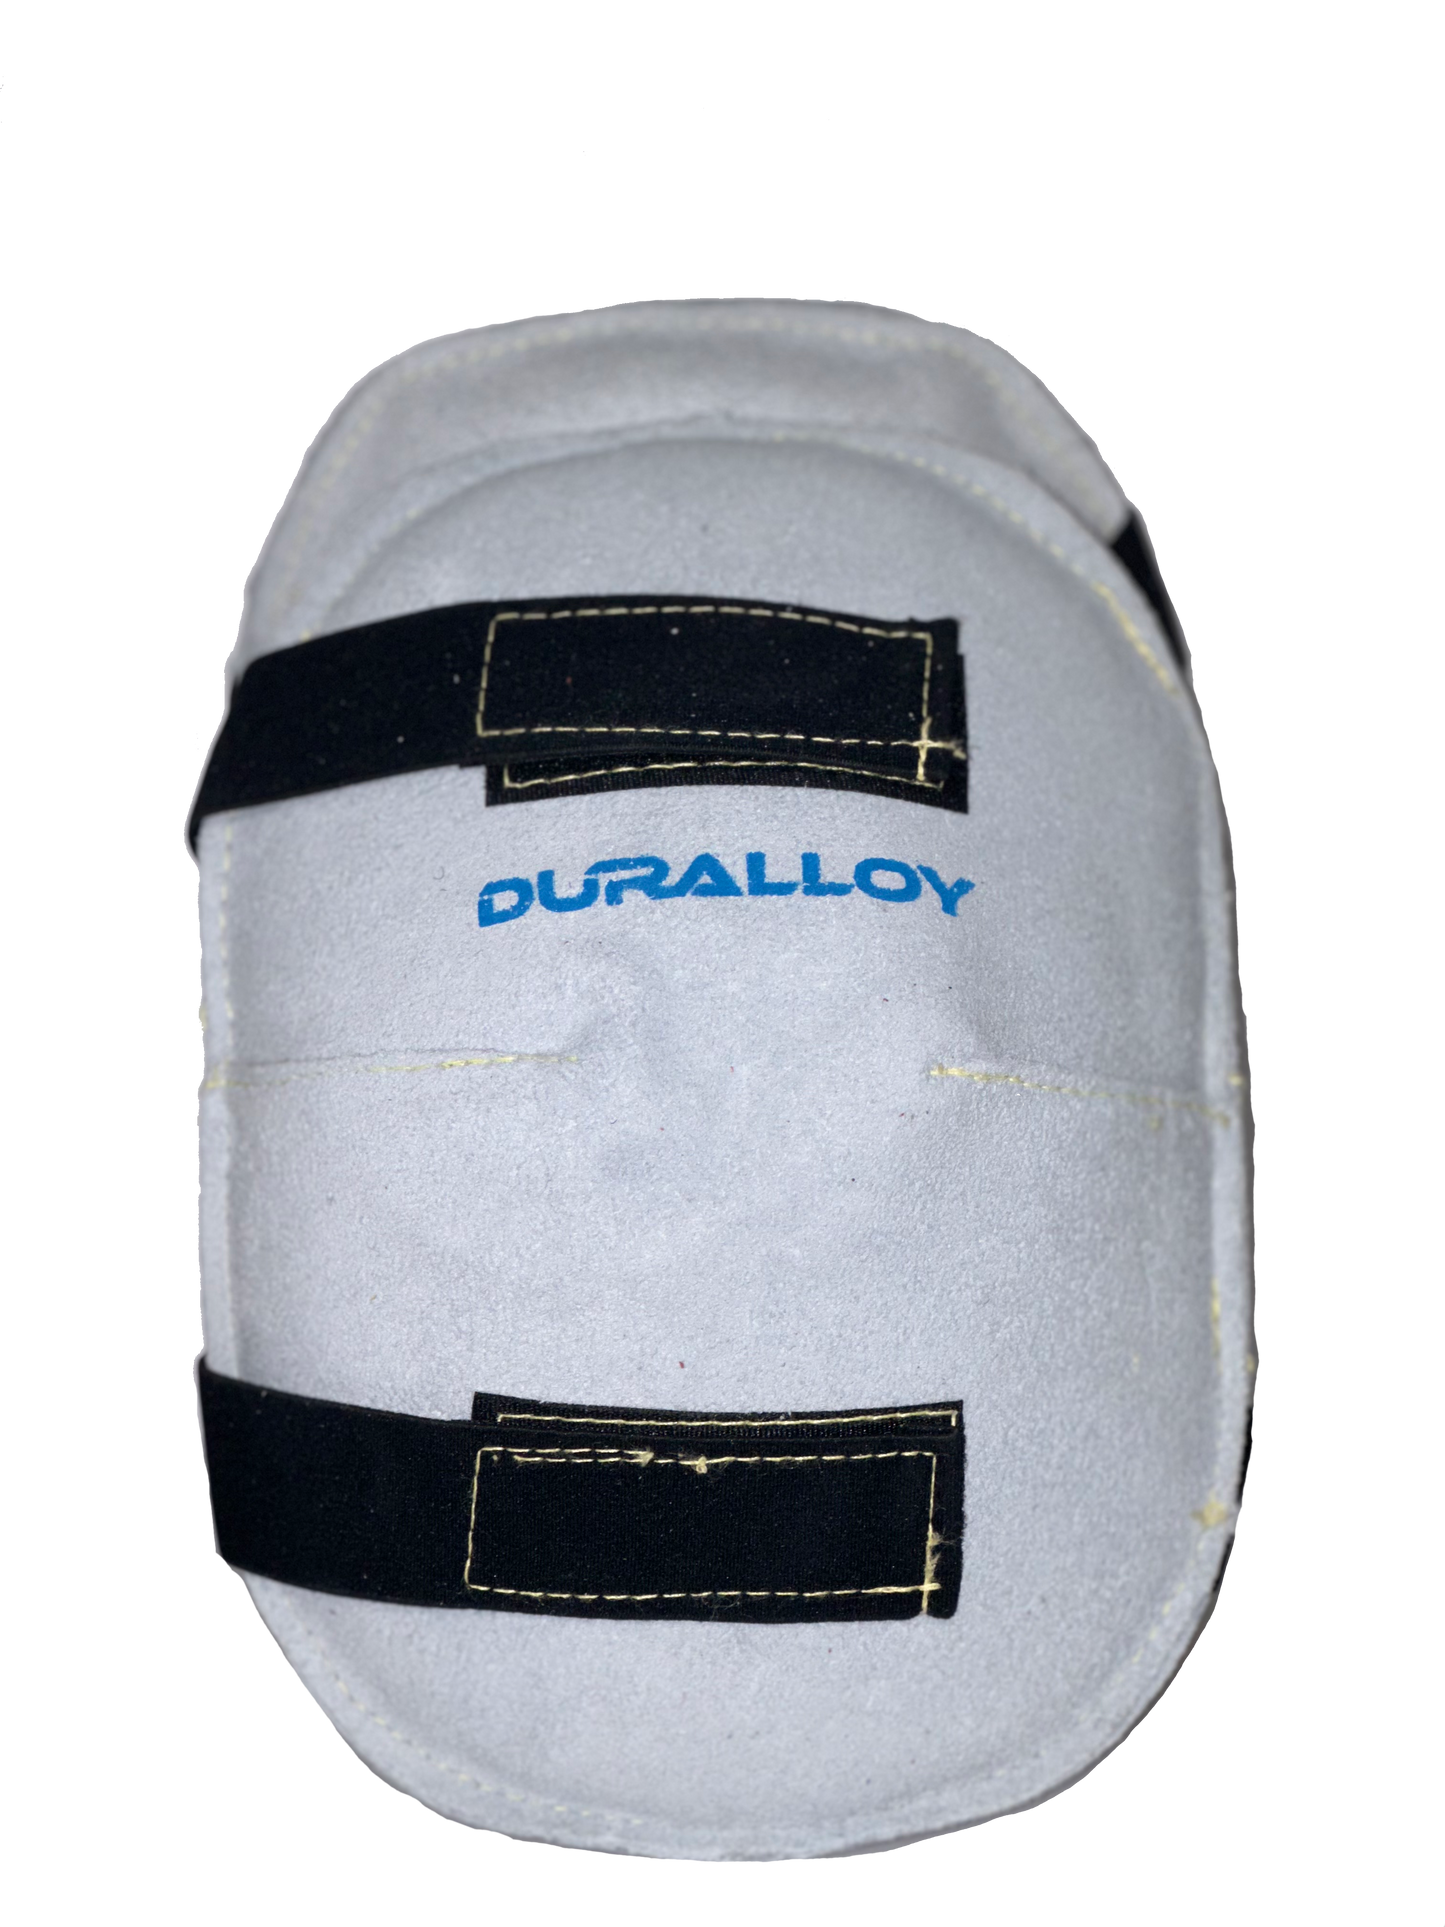 Duralloy Leather Knee Pads